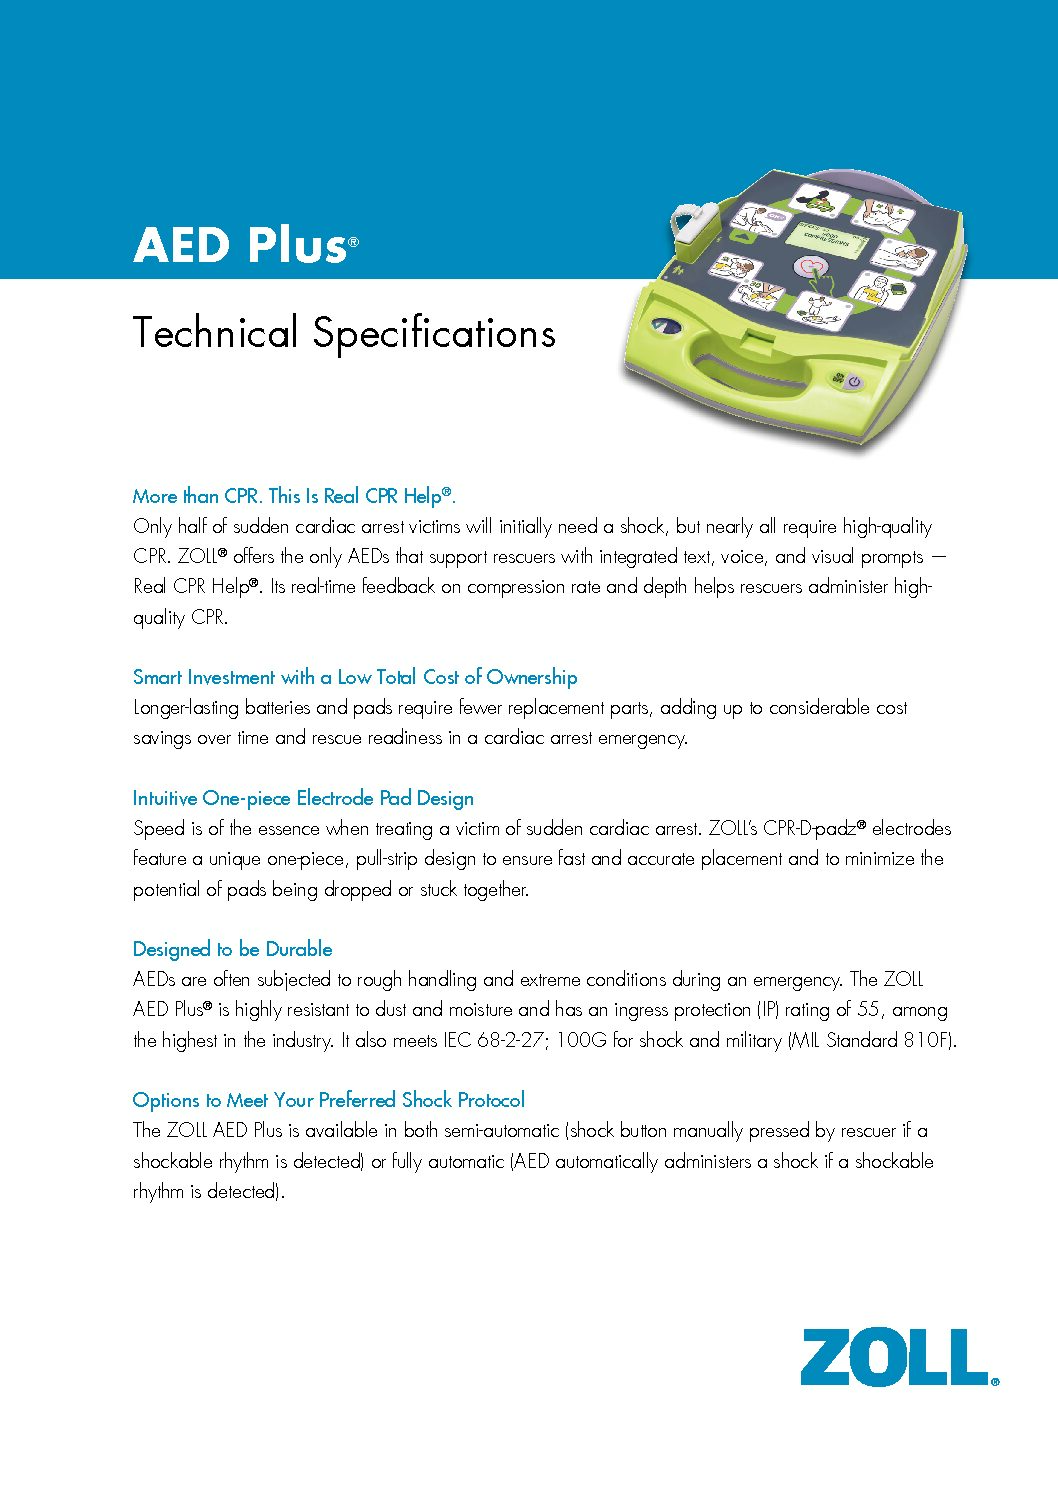 ZOLL AED Plus Defibrillator - Cardiacx Automated External Defibrillator